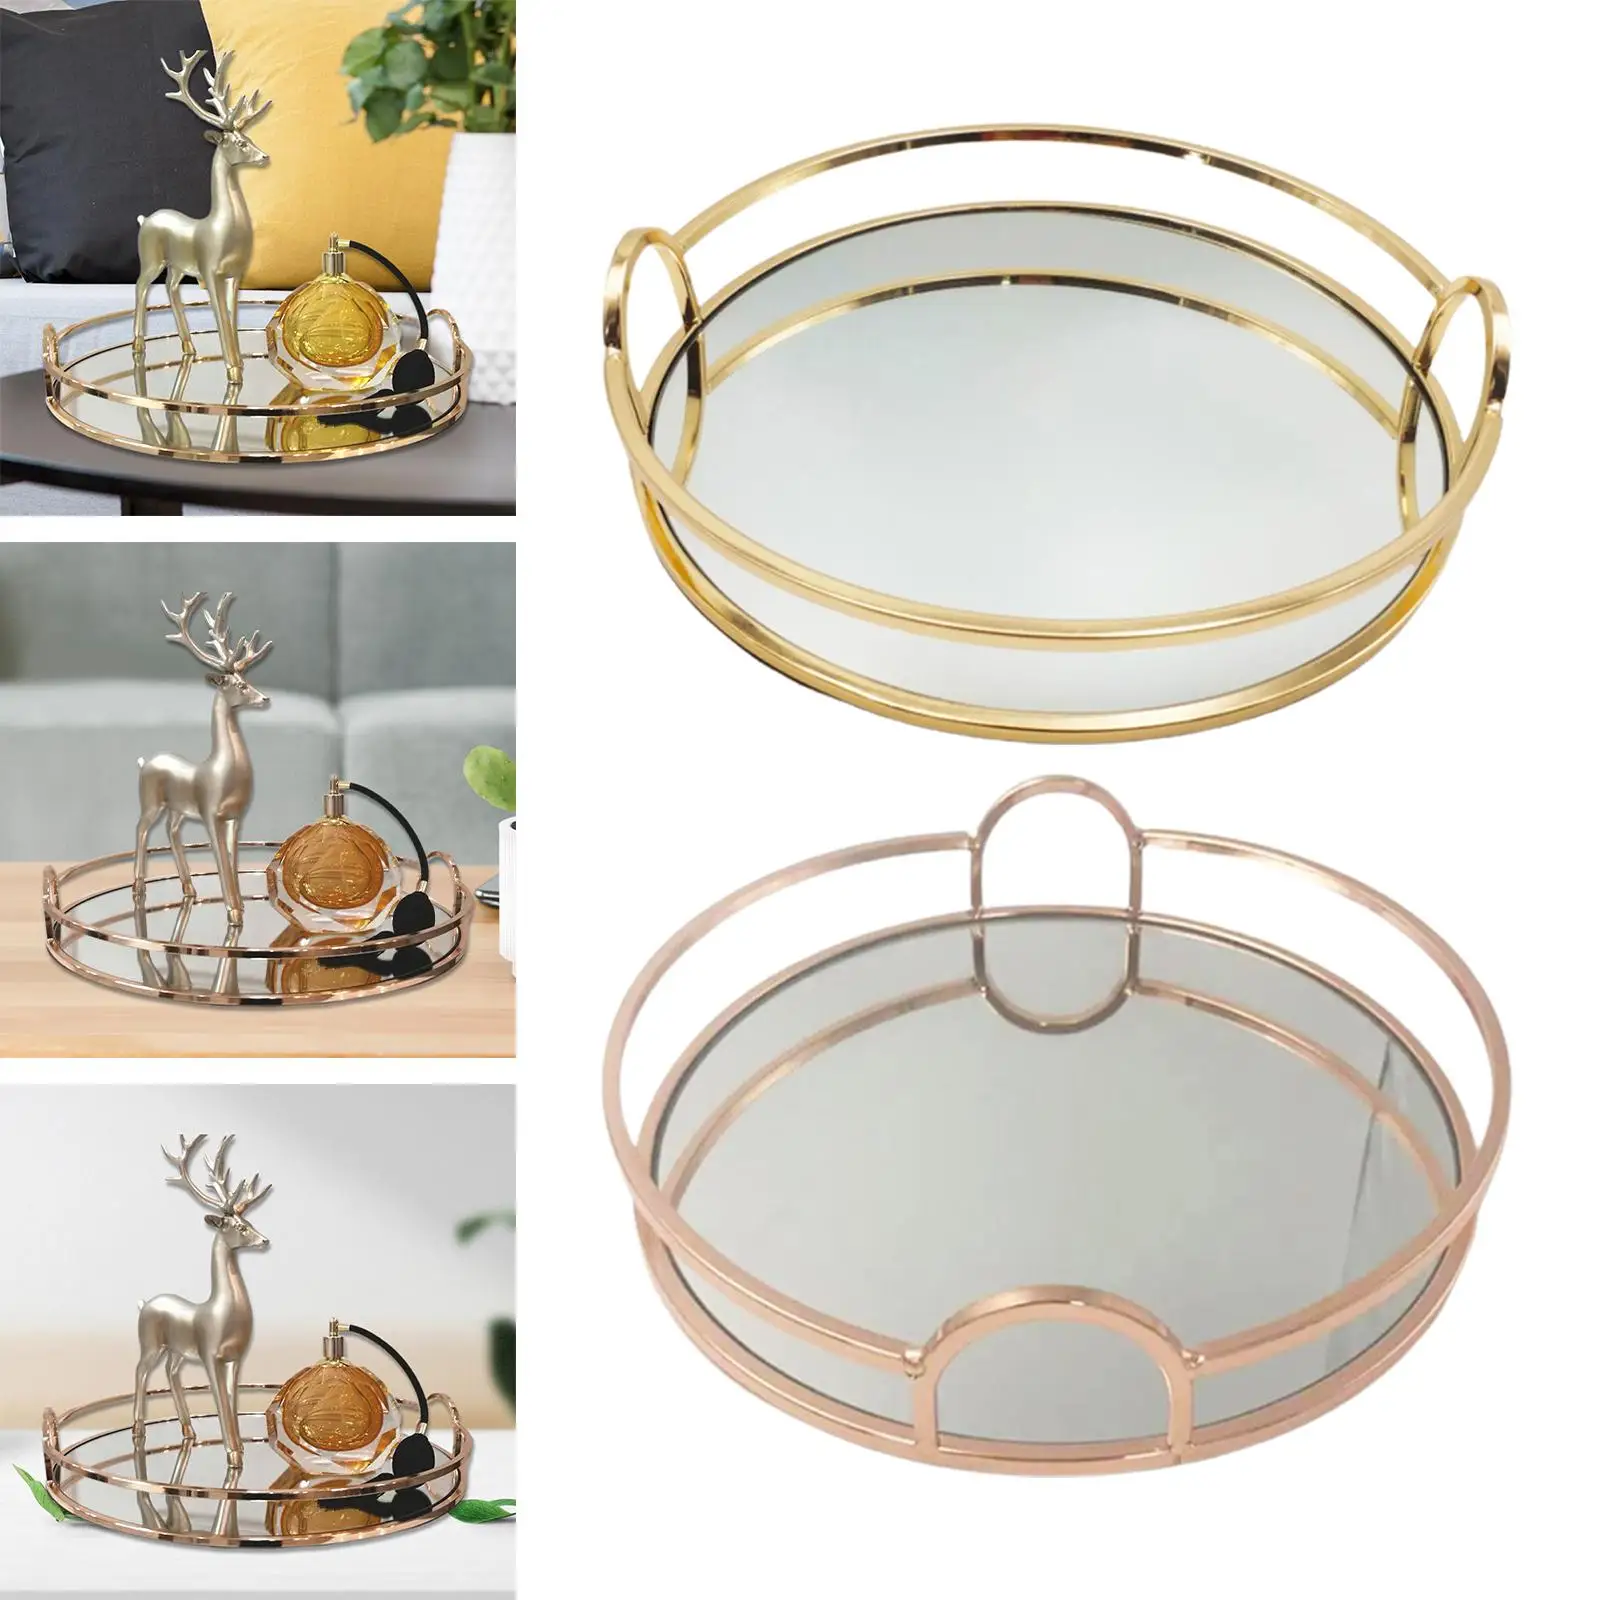 Mirror Serving Tray Serving Plate Mirror Tray Organizer for Dessert Earring